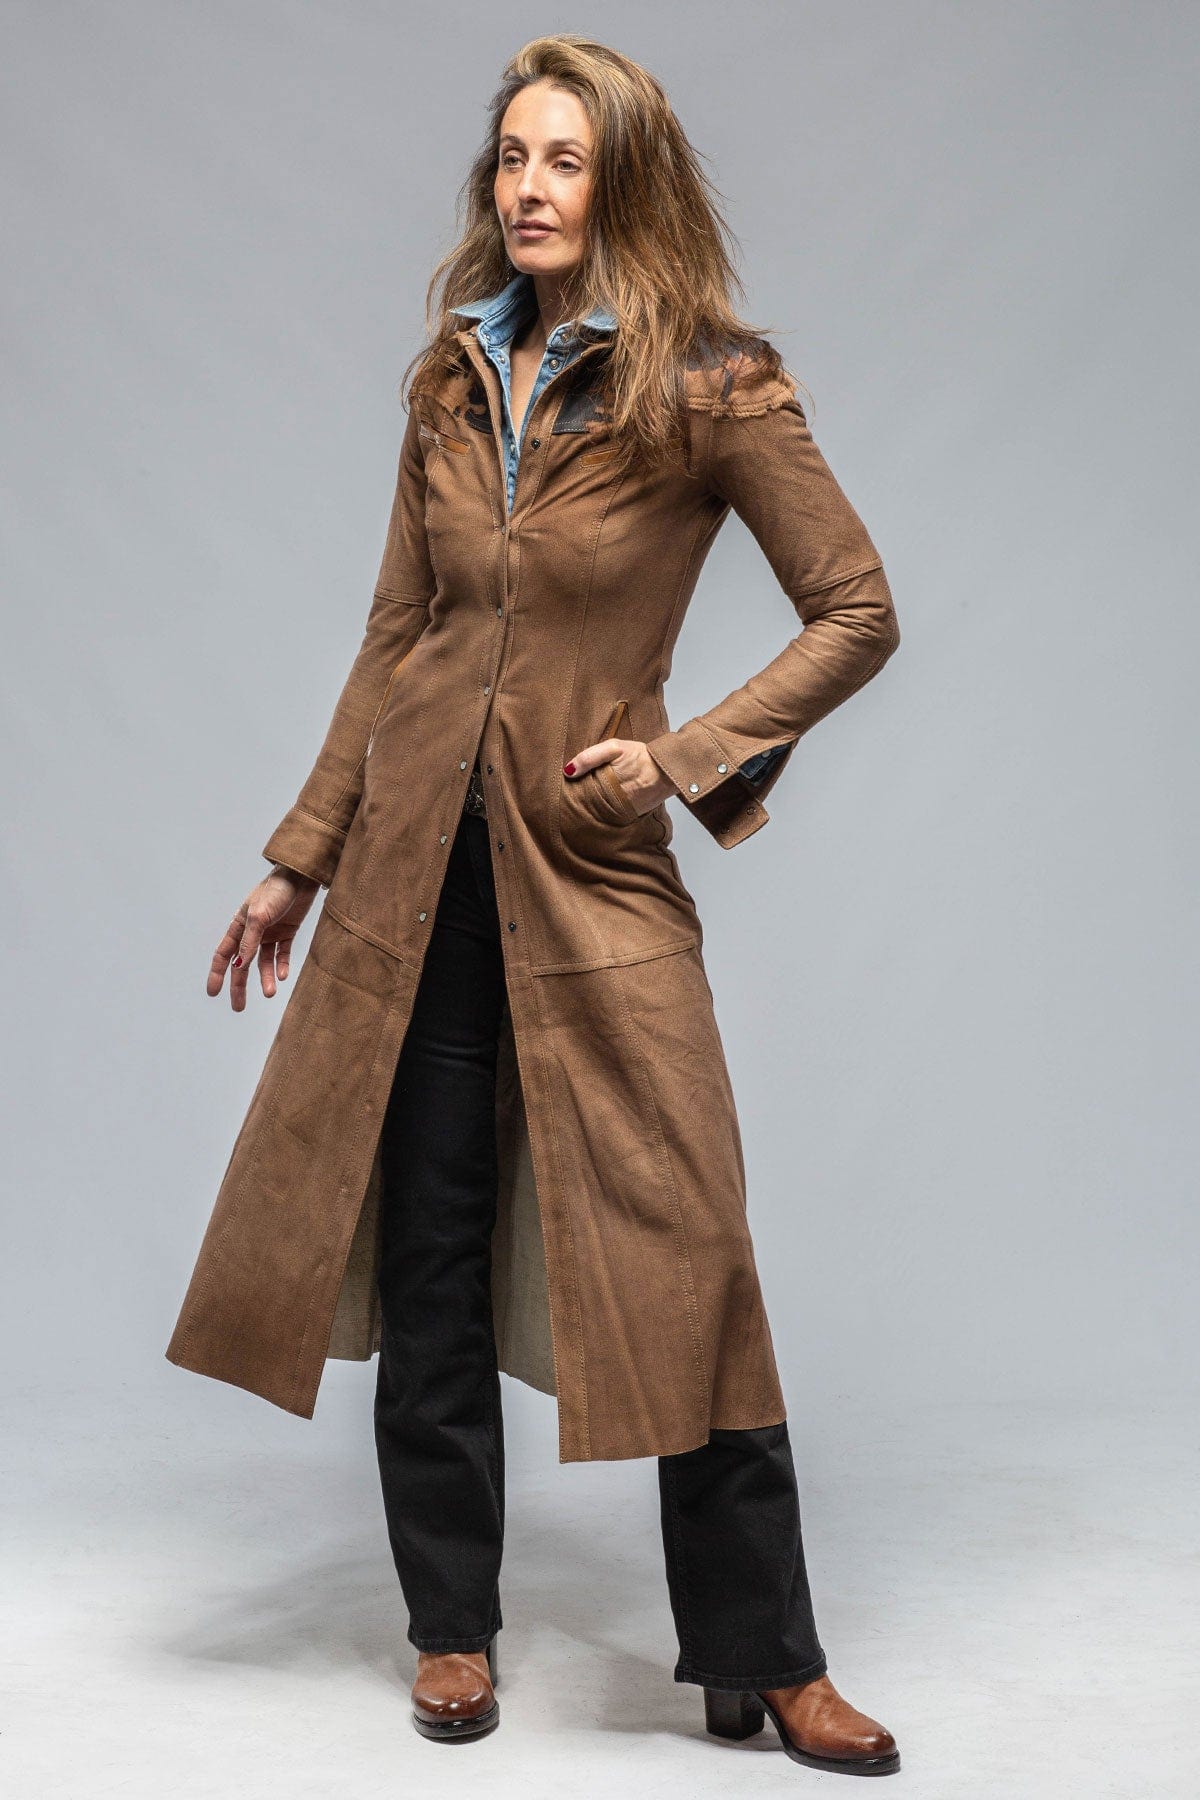 Waggoner Long Hair-On Suede Duster - AXEL'S